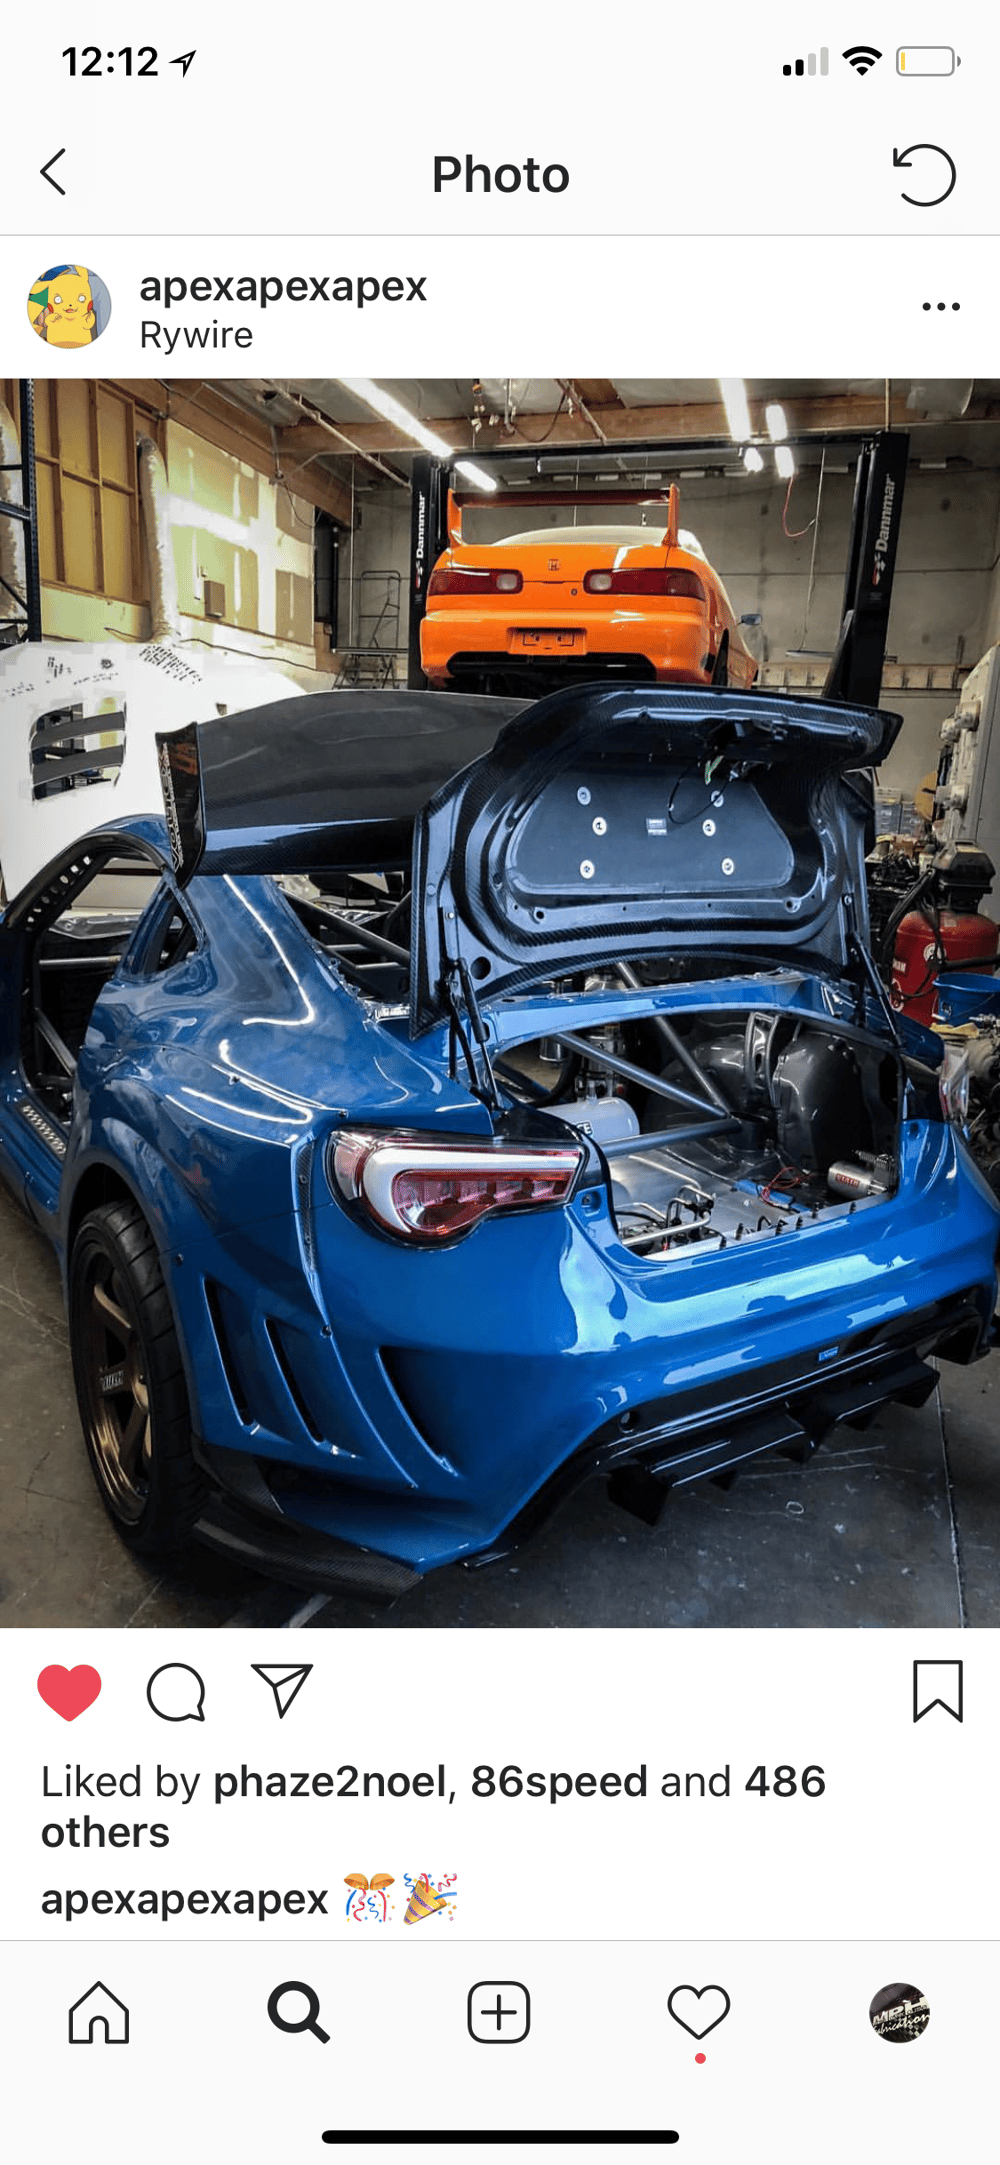 FRS/BRZ/GT86 OEM style trunk